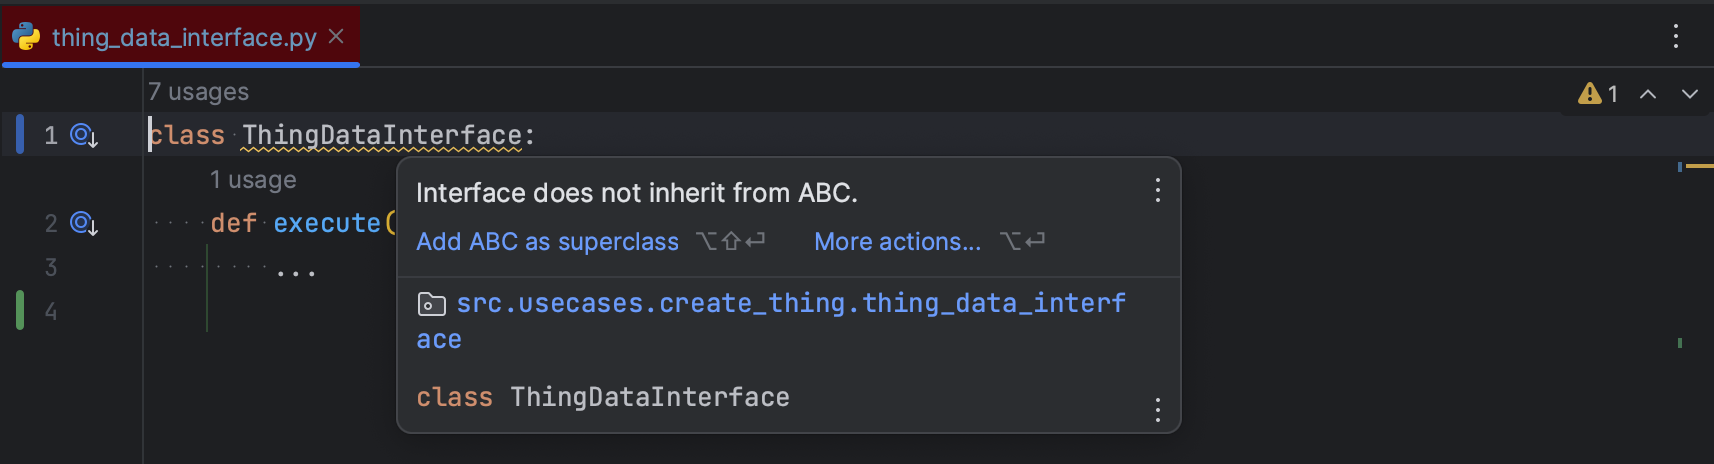 The Python OOP Companion marks the "ThingDataInterface" as warning, because the user has configured "Interface" as interface suffix. ThingDataInterface matches the suffix, but does not inherit from ABC